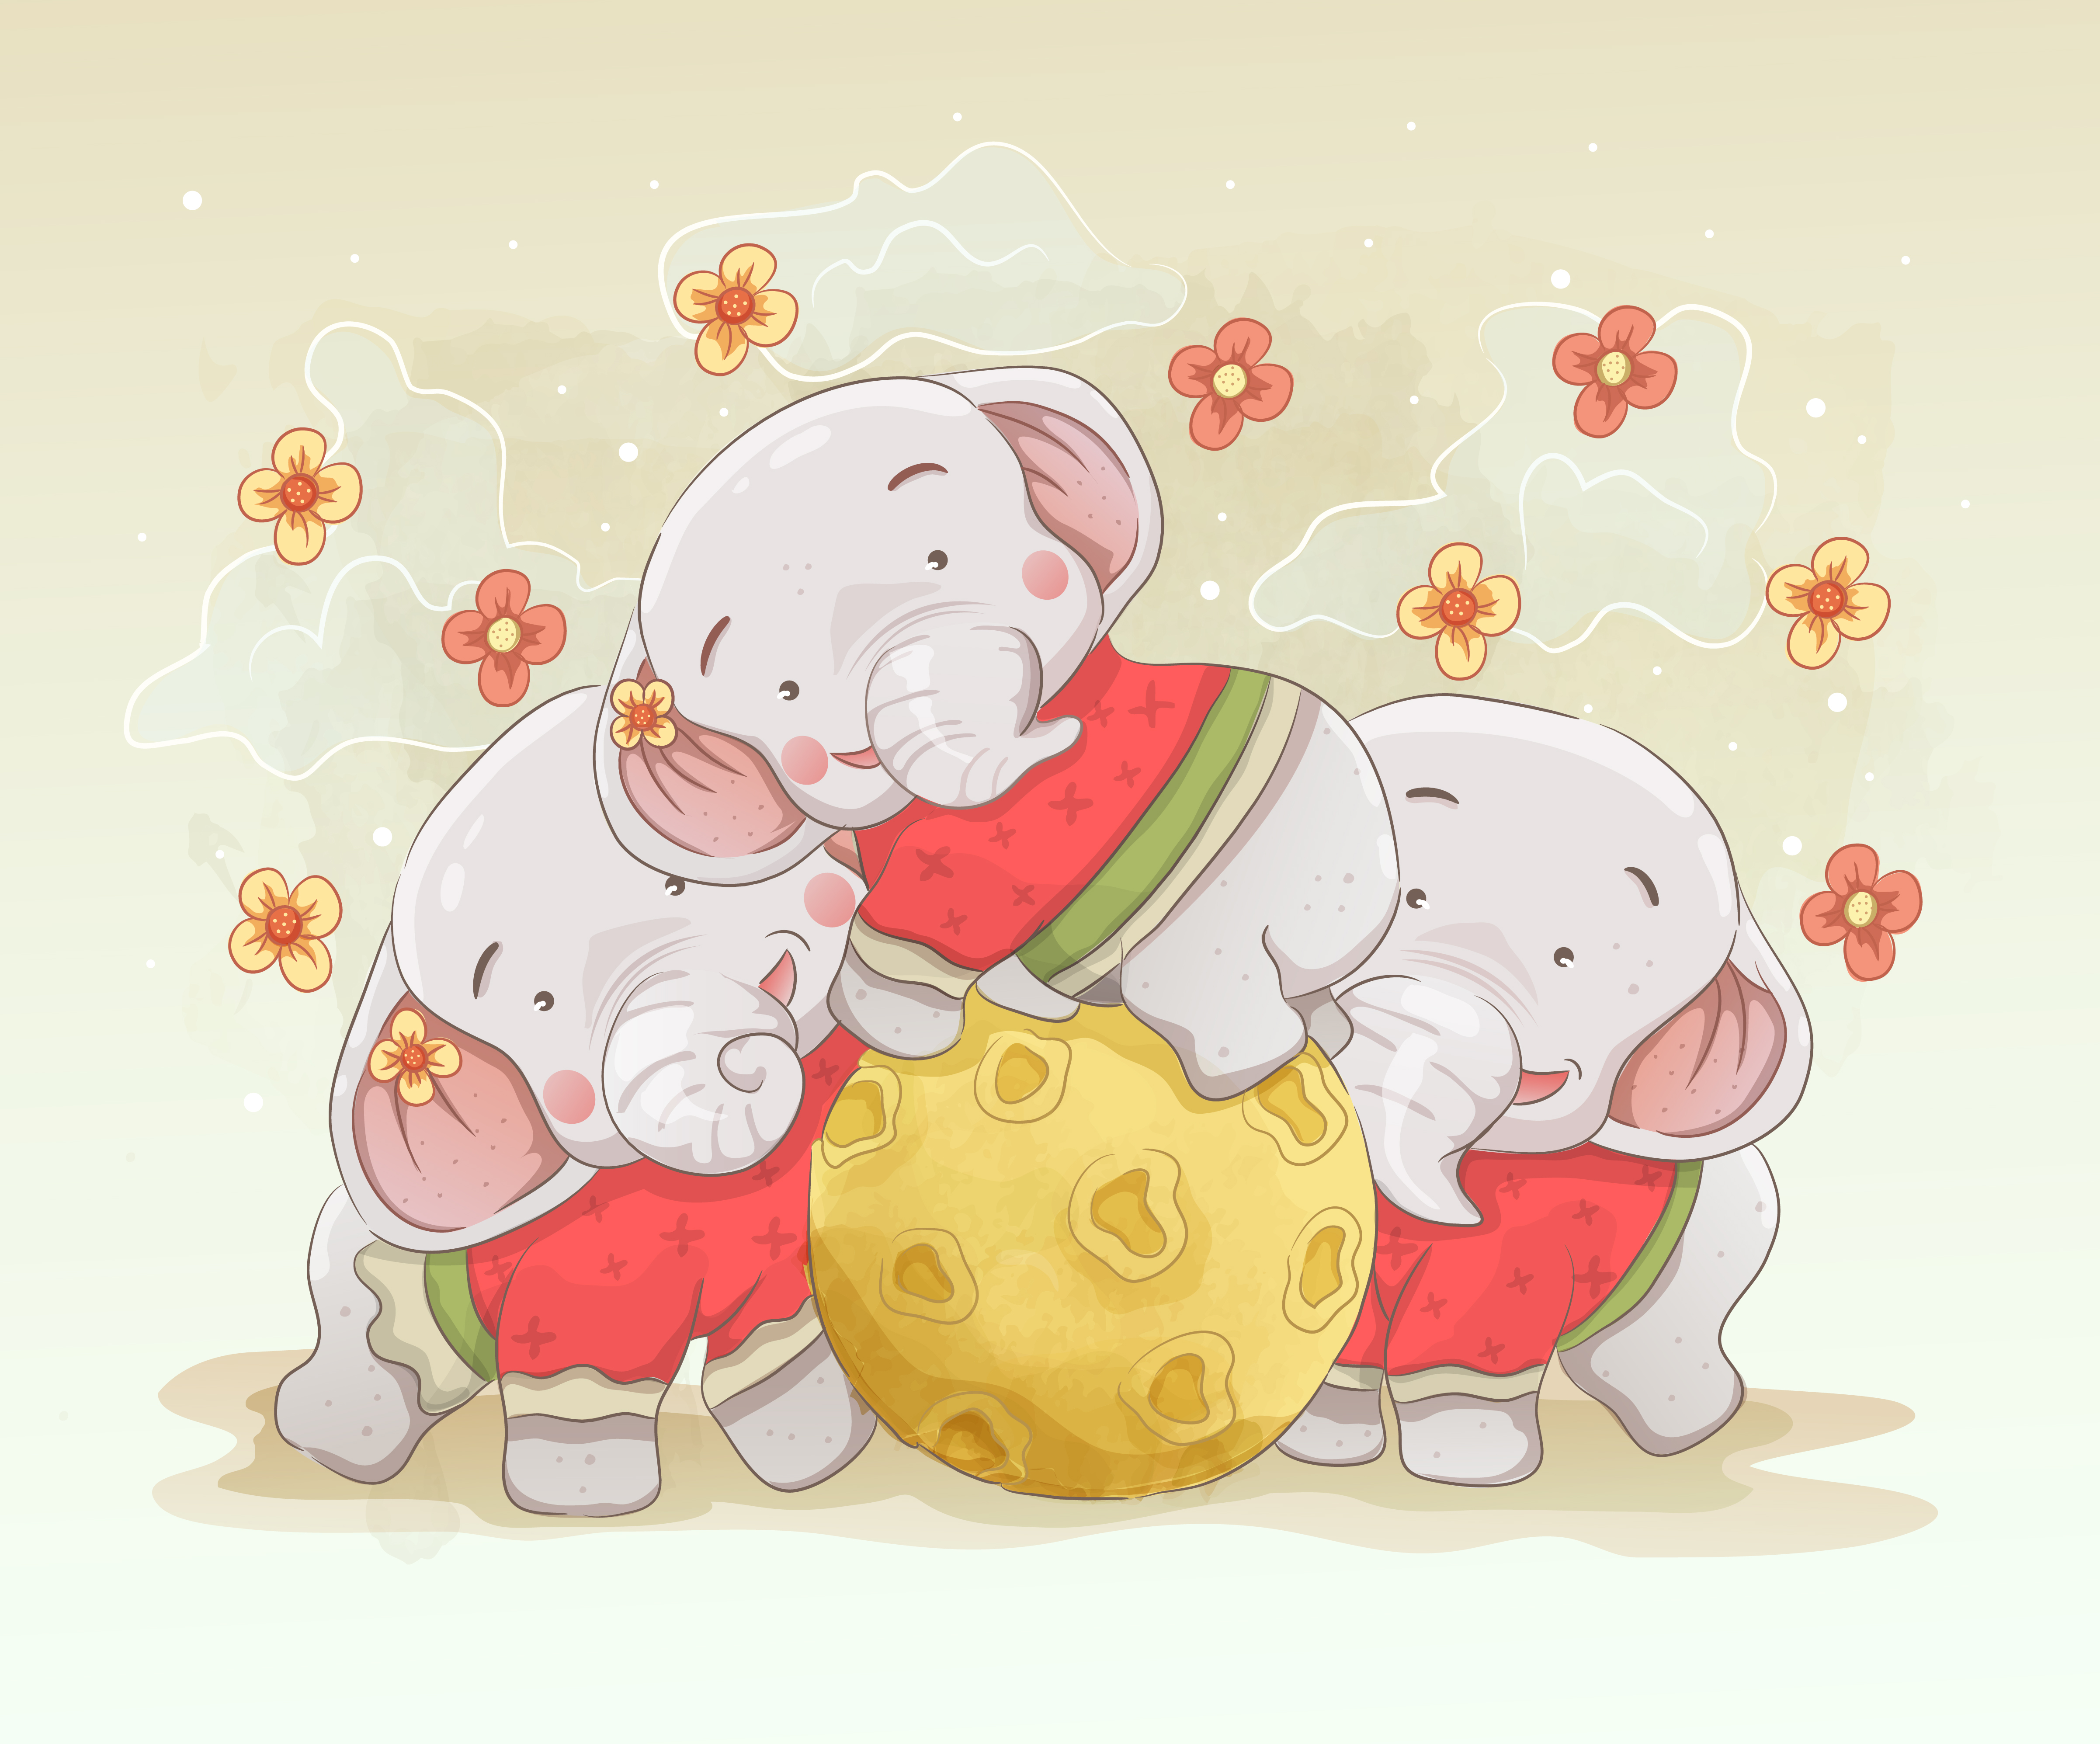 Download Elephant family playing together 1221904 - Download Free Vectors, Clipart Graphics & Vector Art